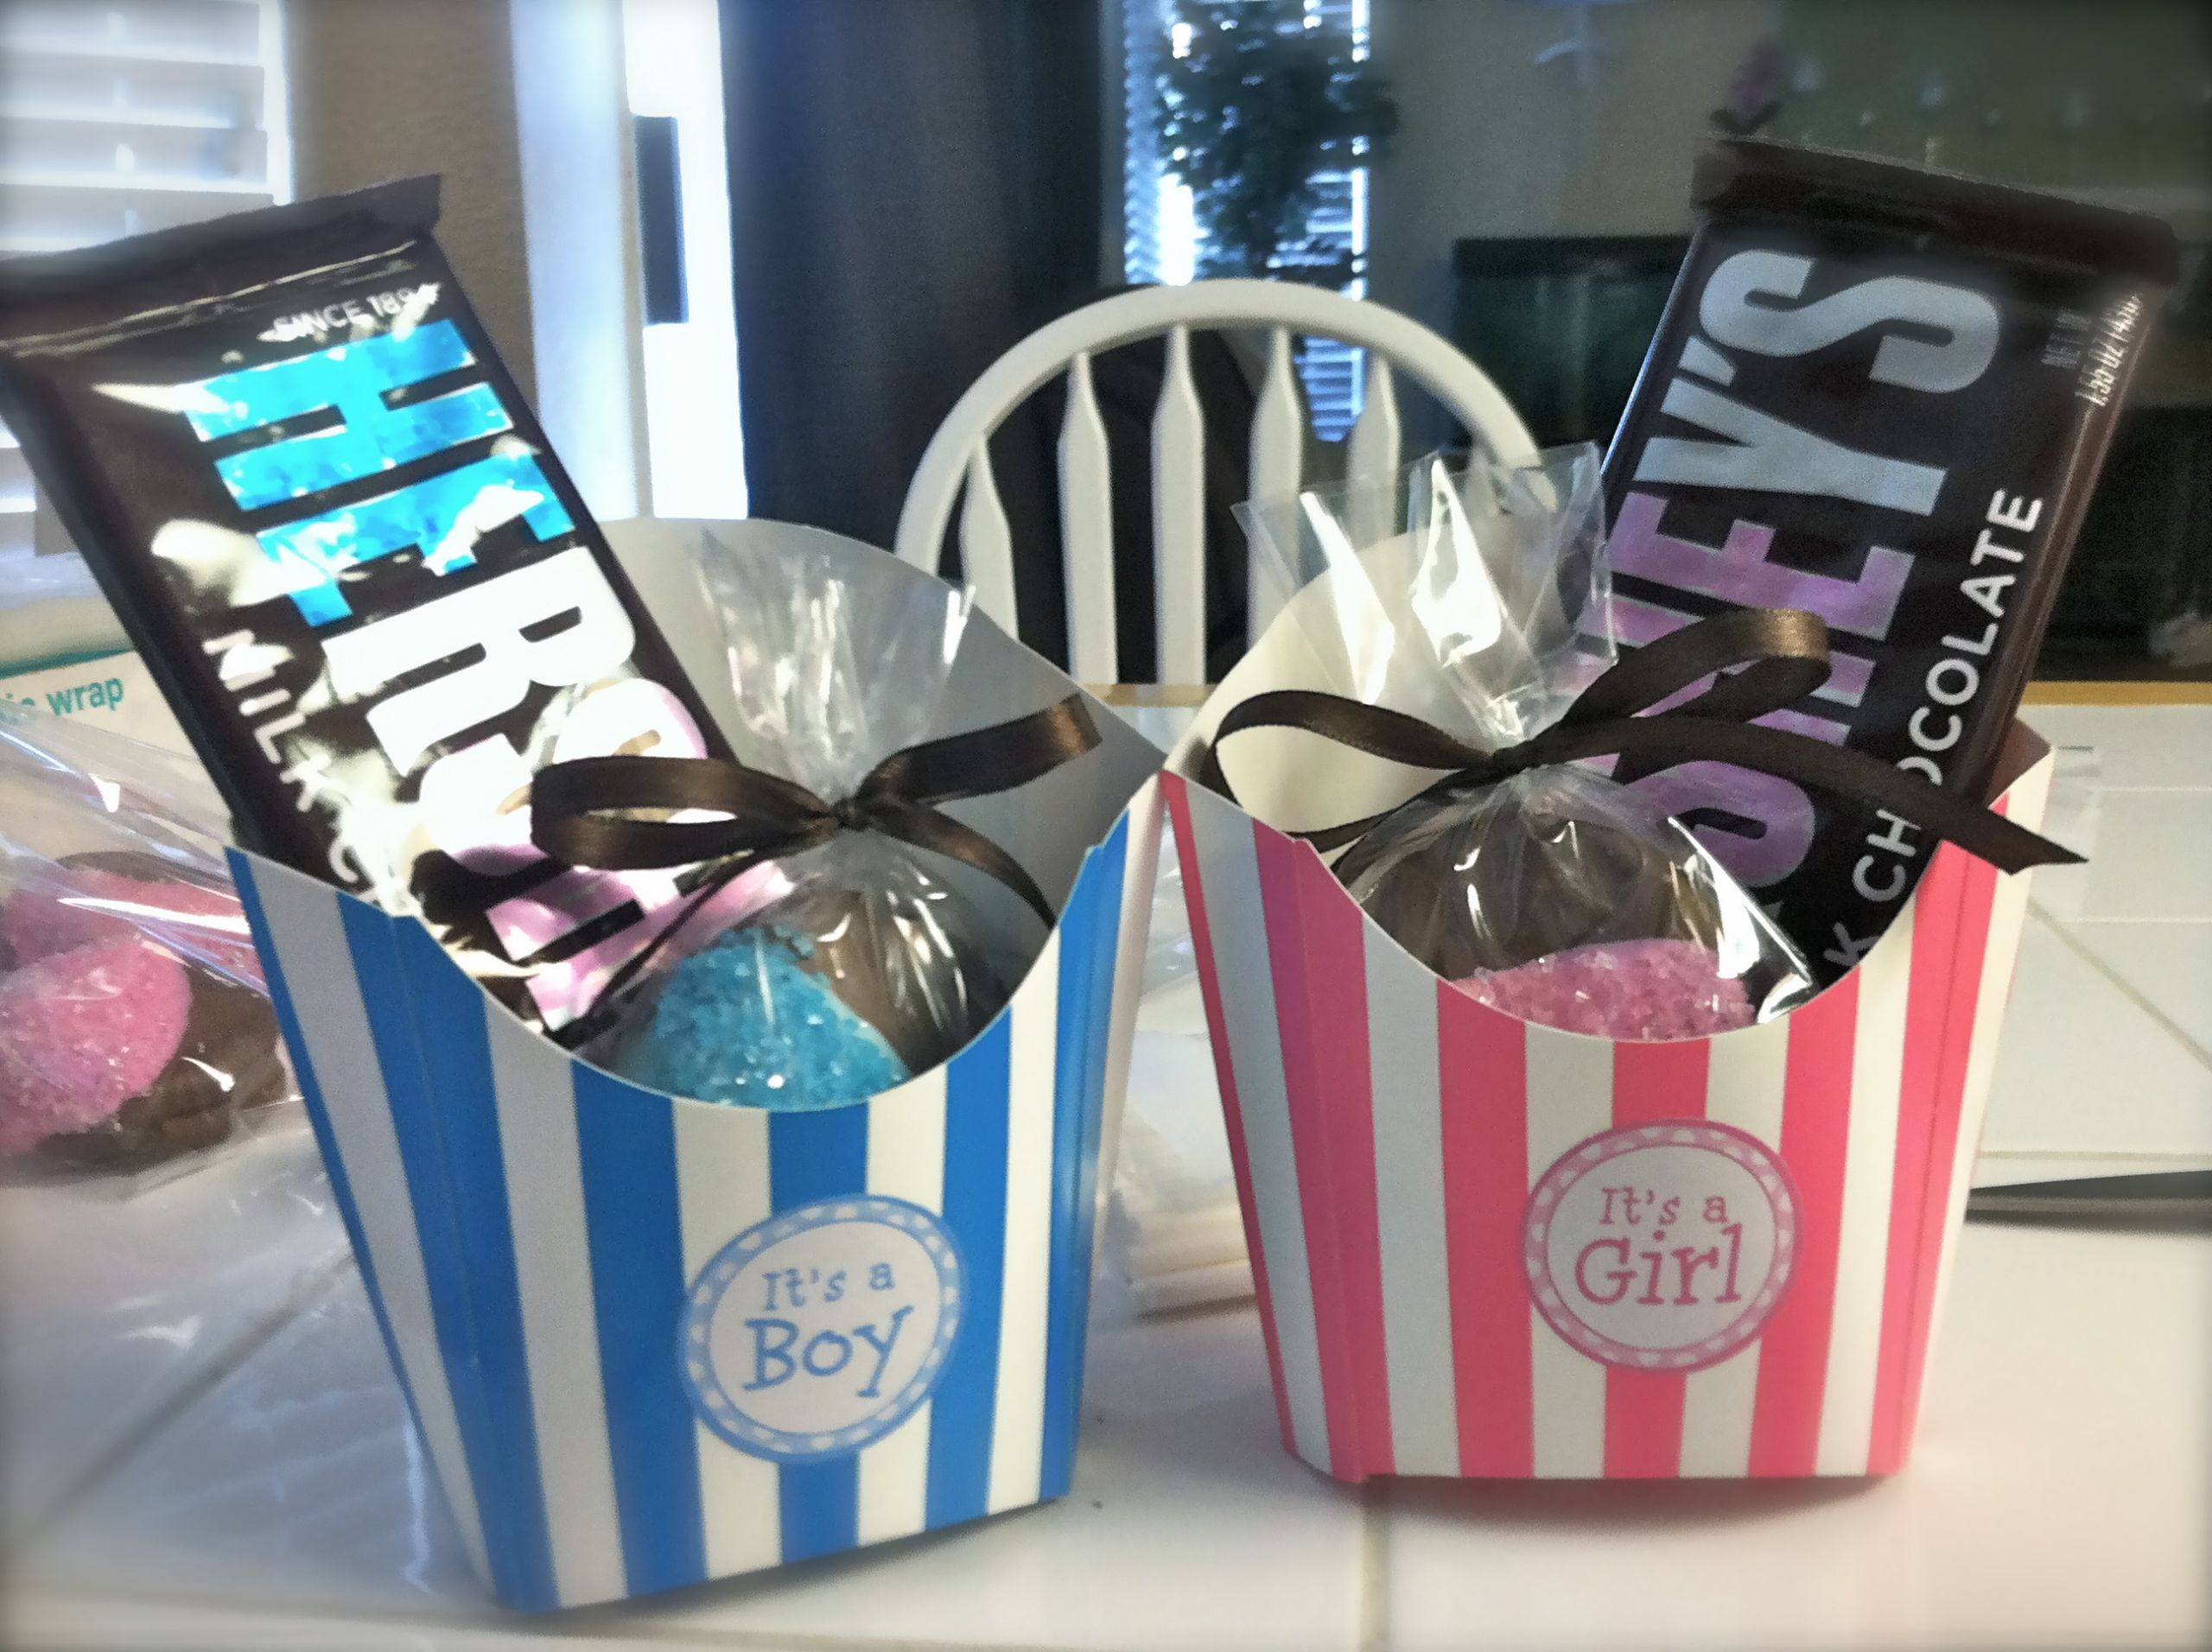 Gift Ideas For Baby Gender Reveal Party
 Our Gender Reveal Party